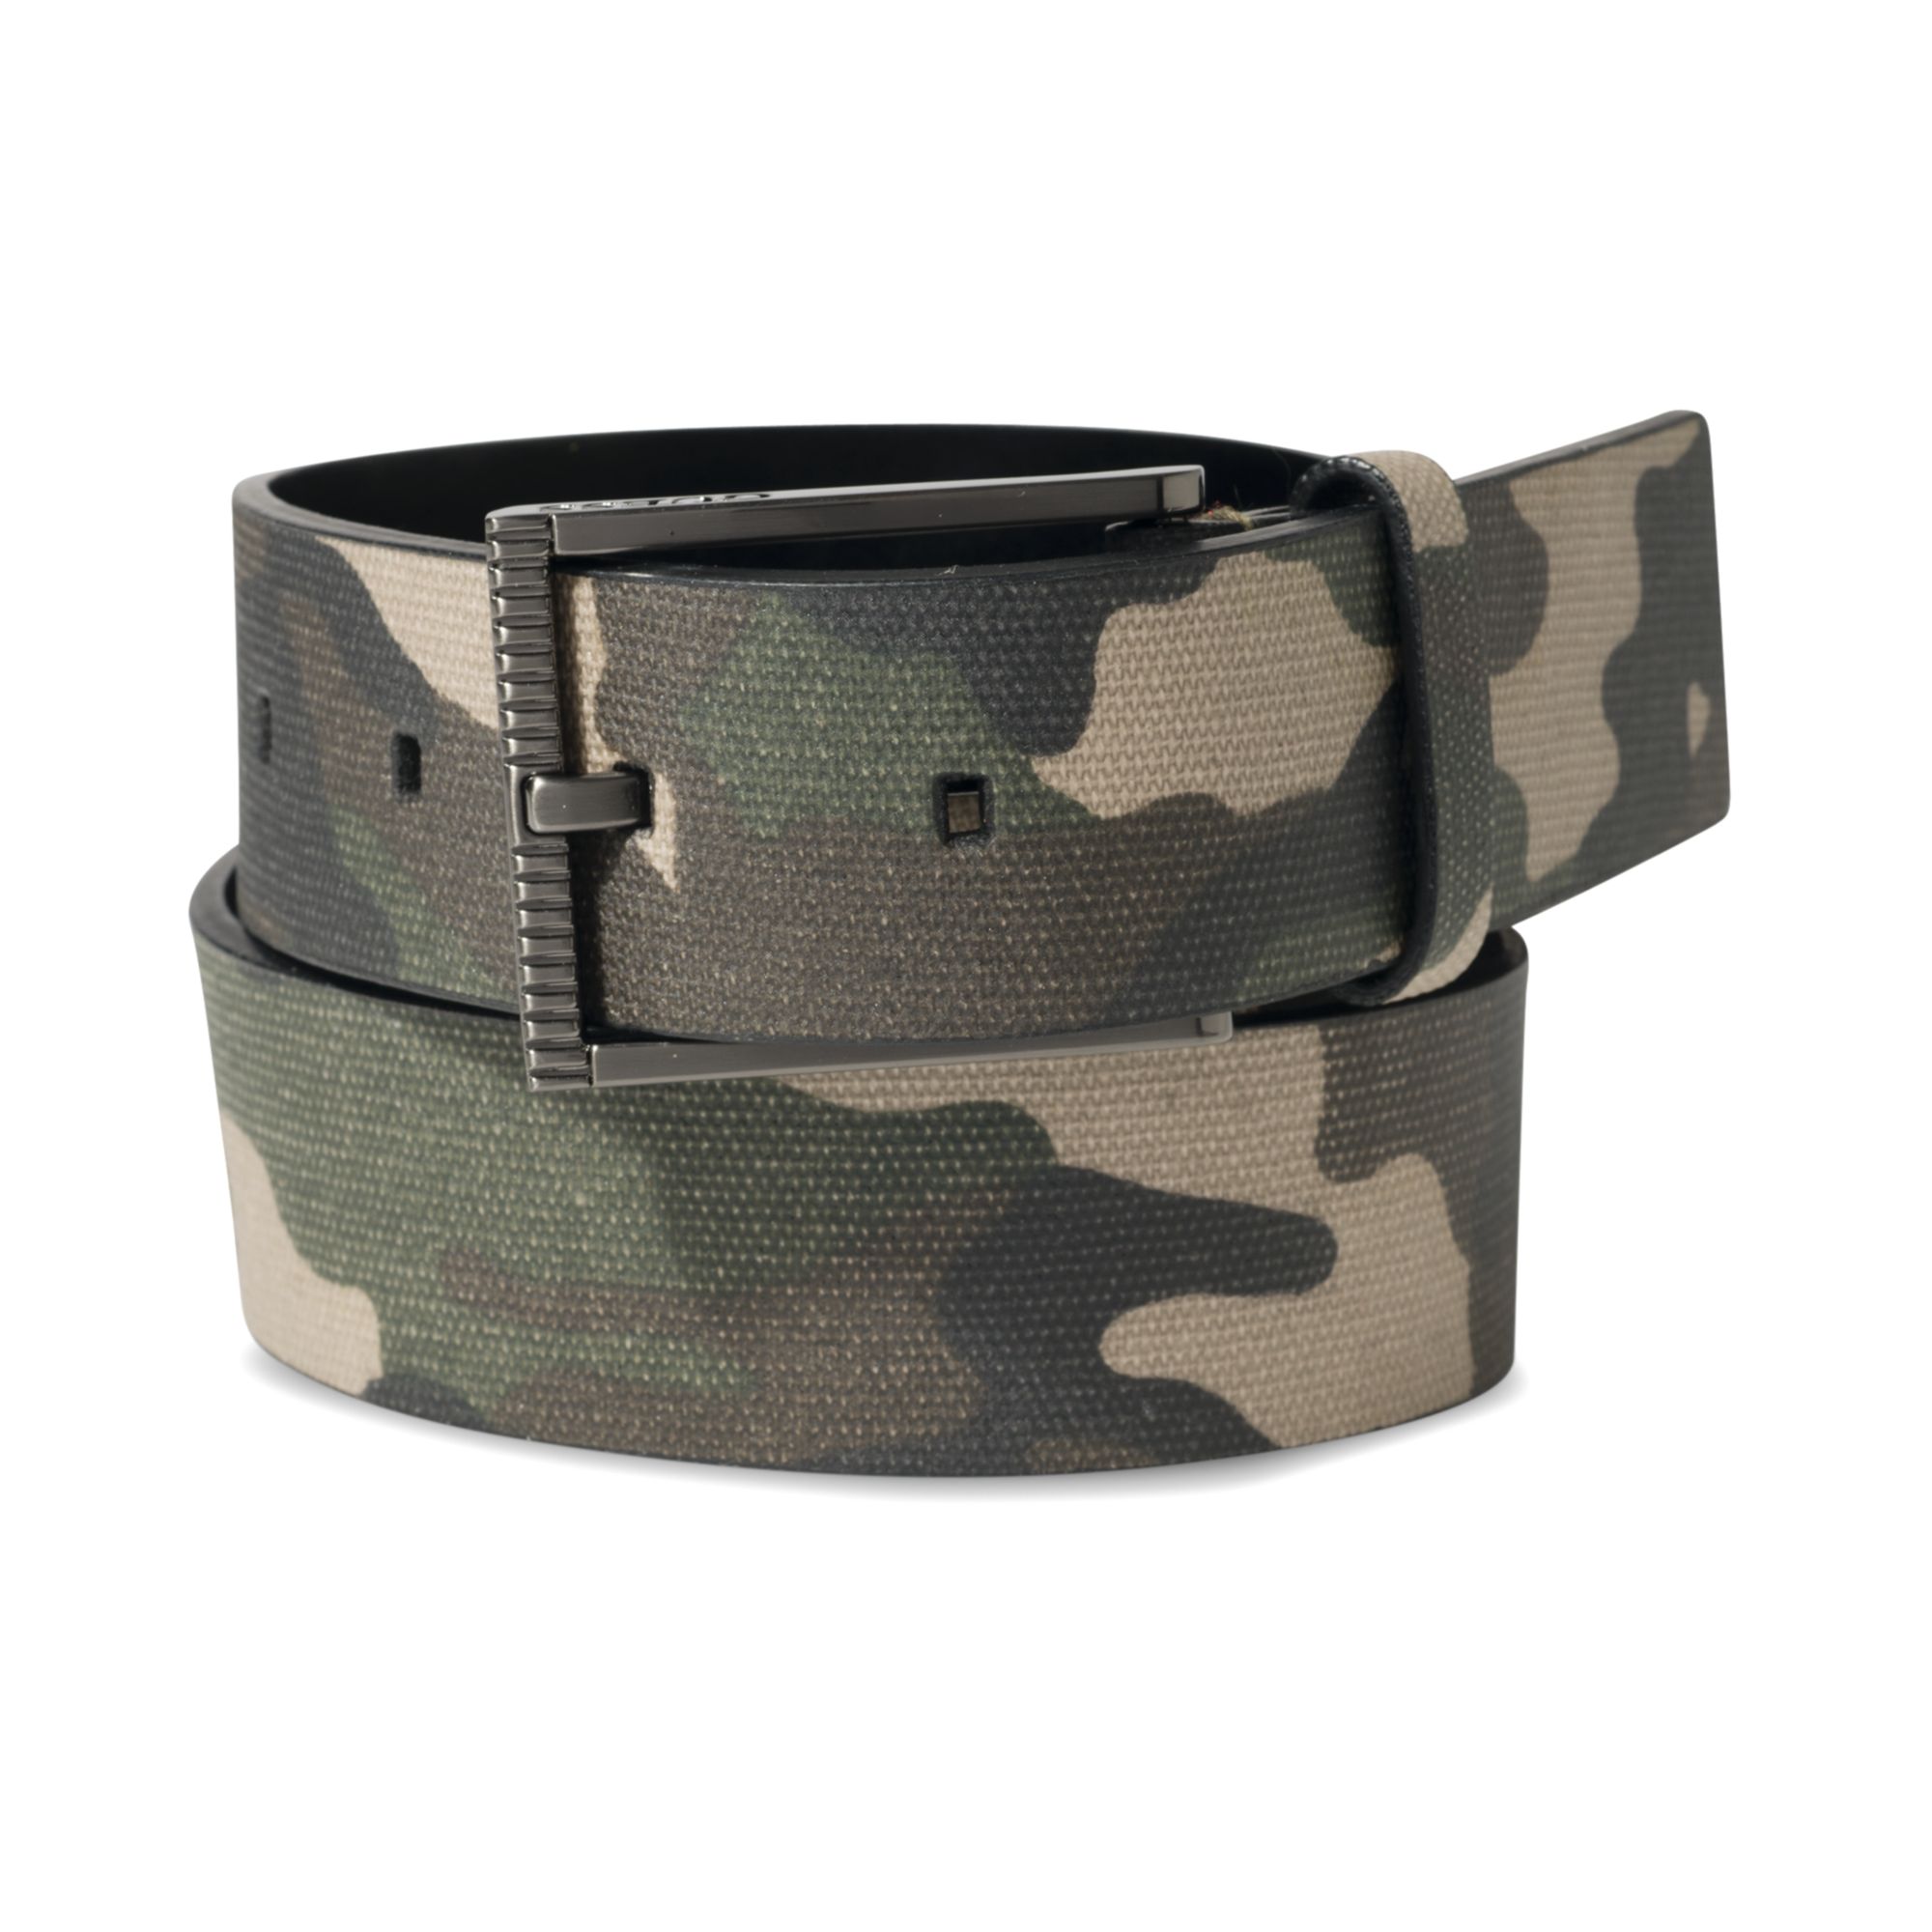 Lyst - Guess Camo Faux Leather Reversible Belt in Green for Men